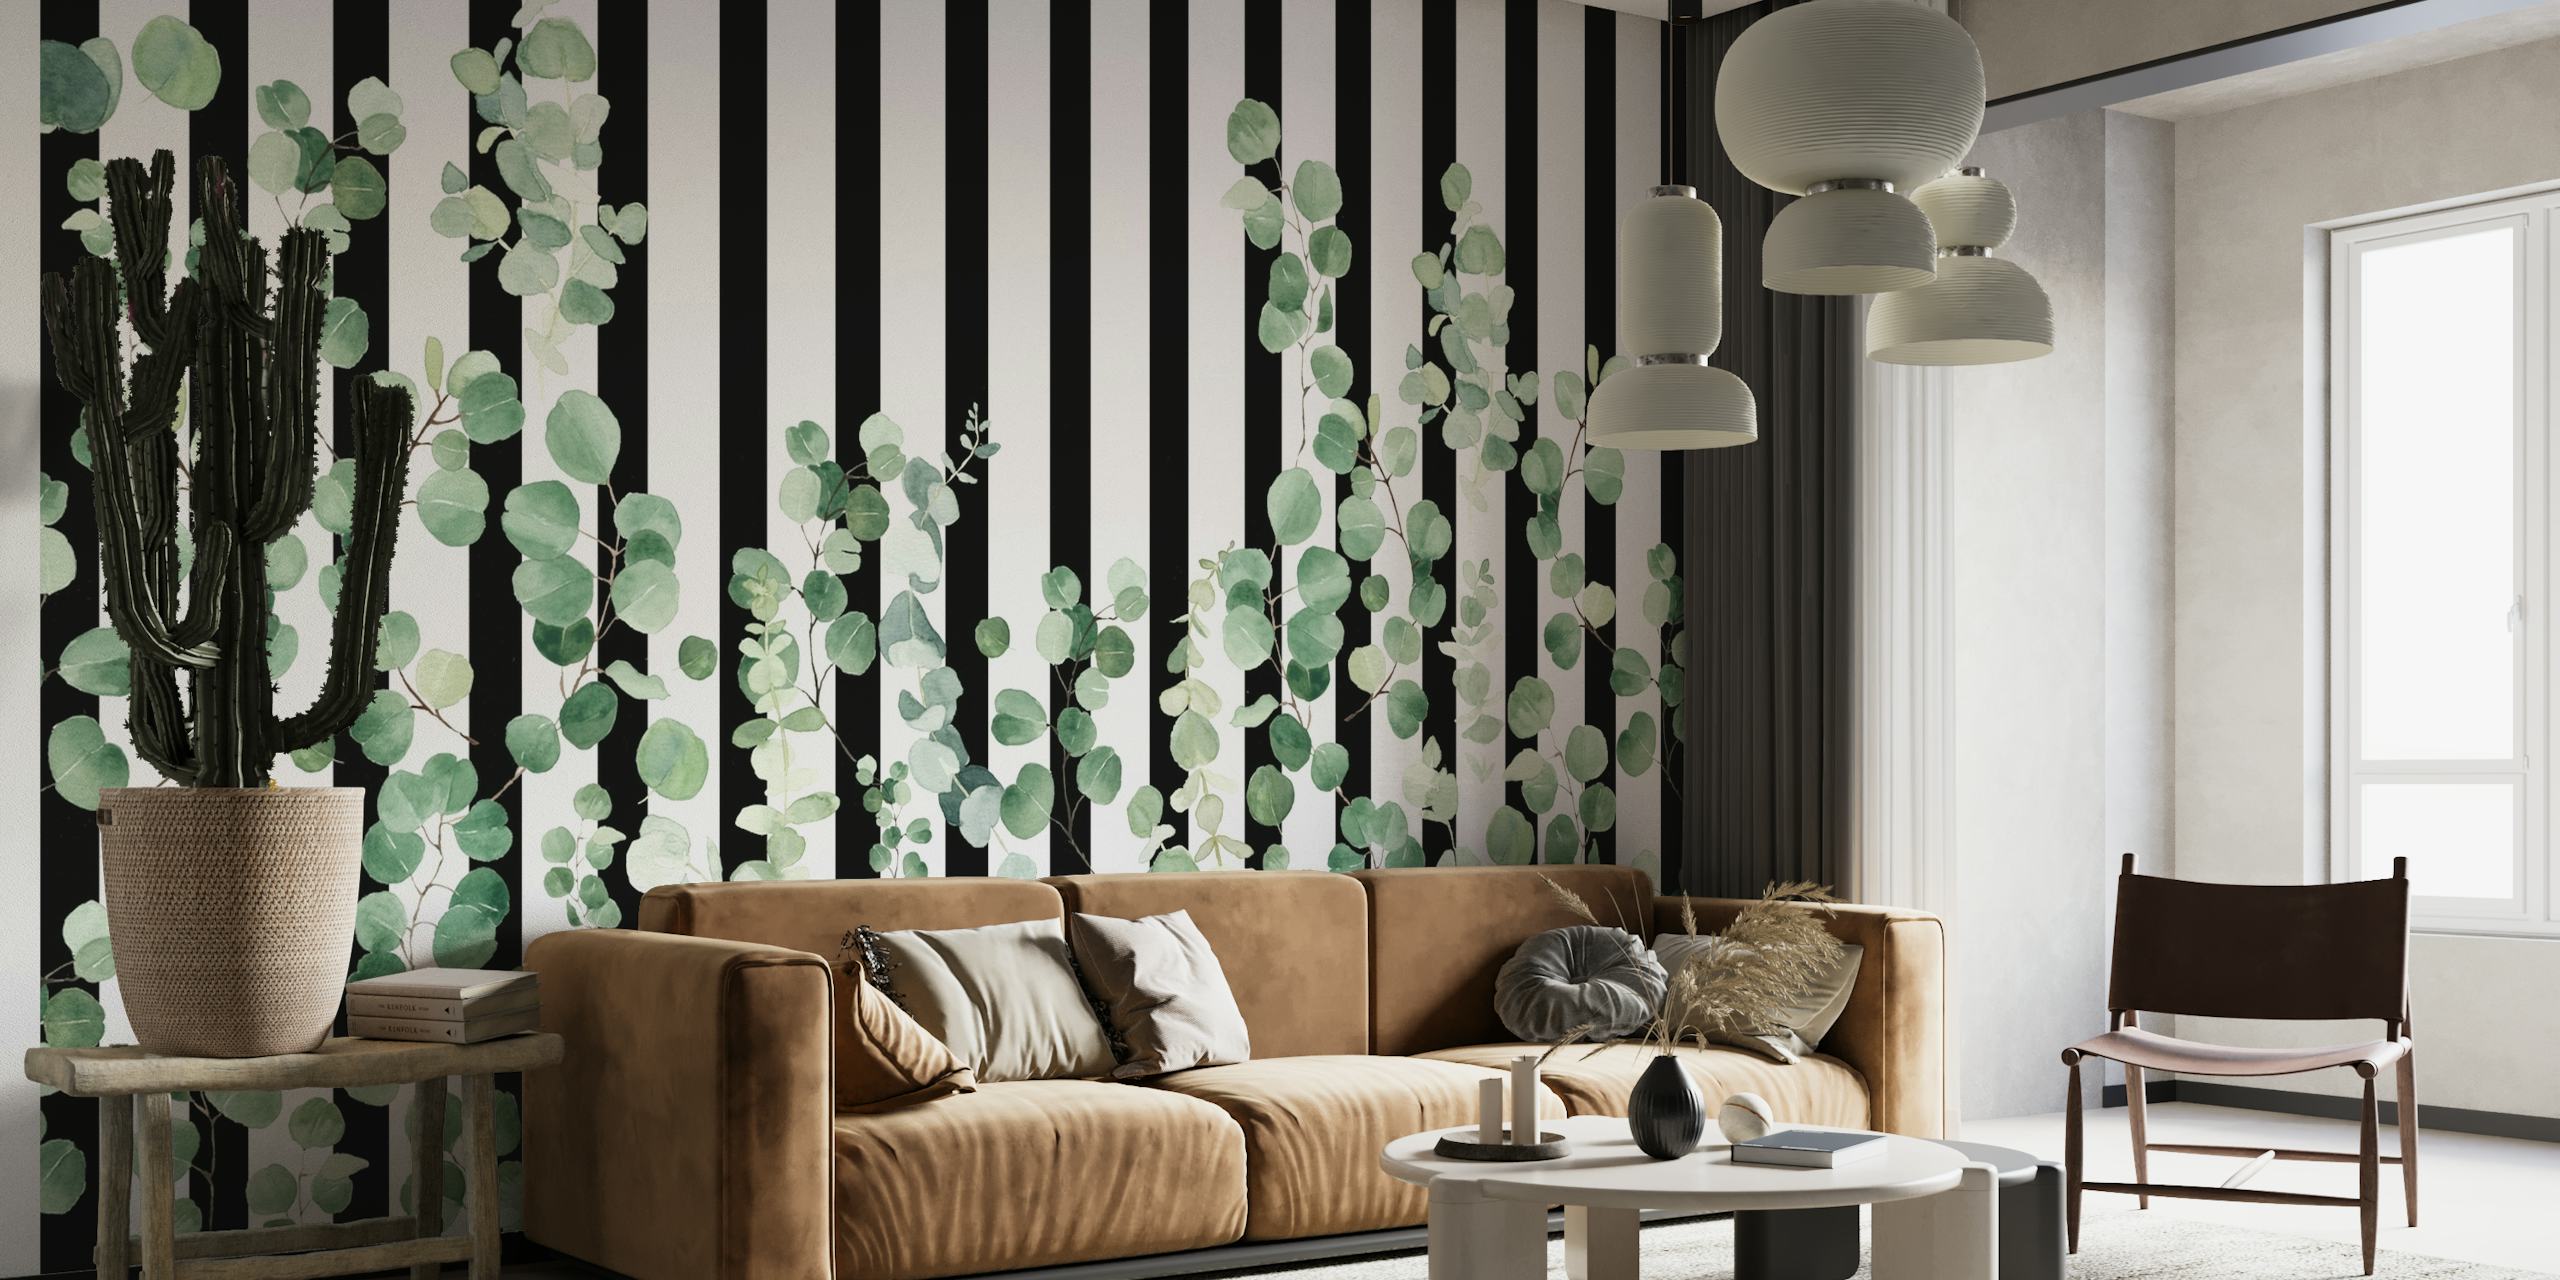 Elegant black and white striped wall mural with green botanical leaves overlay